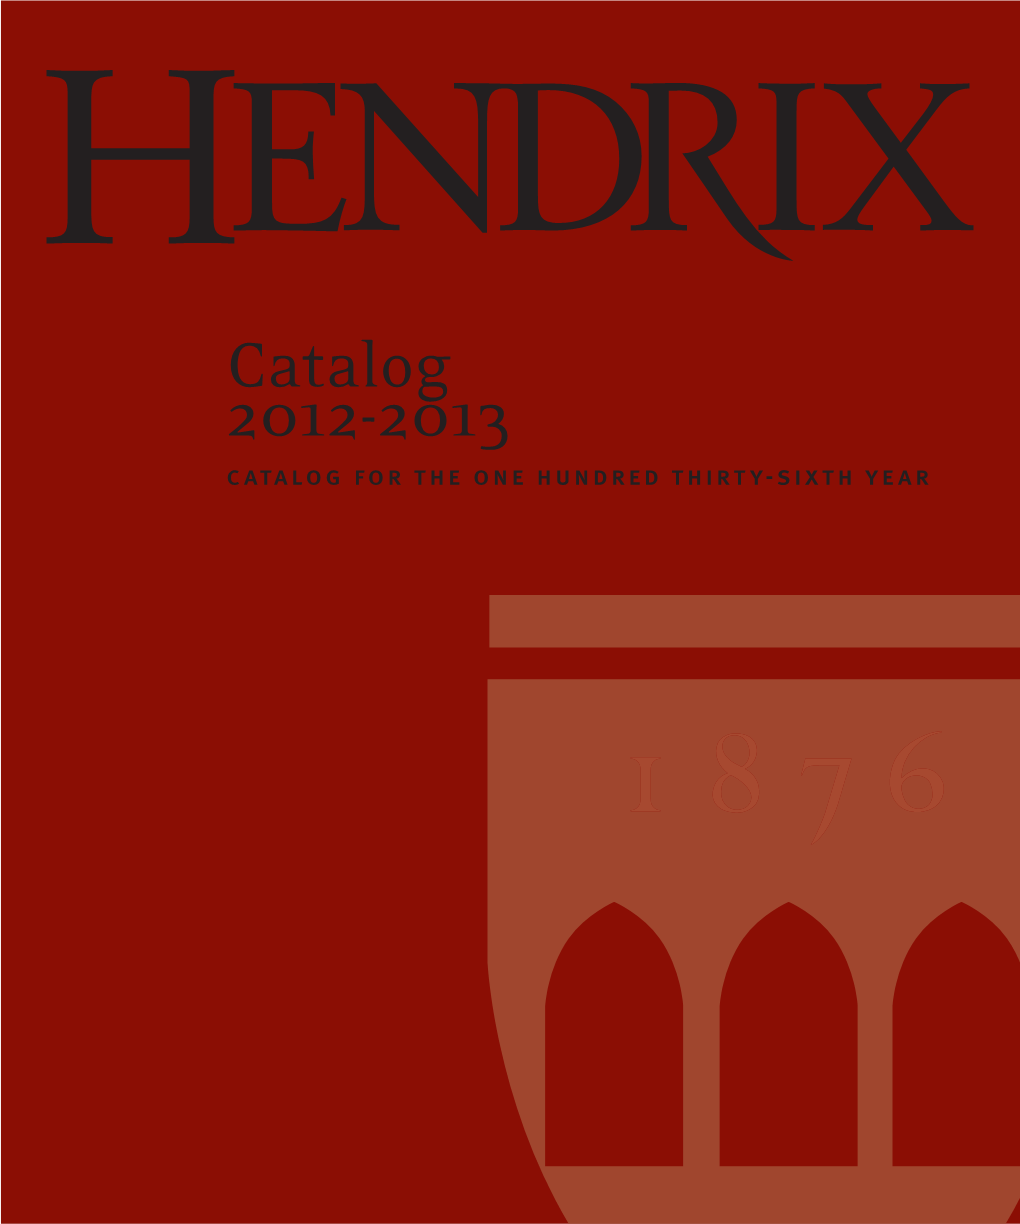 Catalog 2012-2013 Catalog for the One Hundred Thirty-Sixth Year